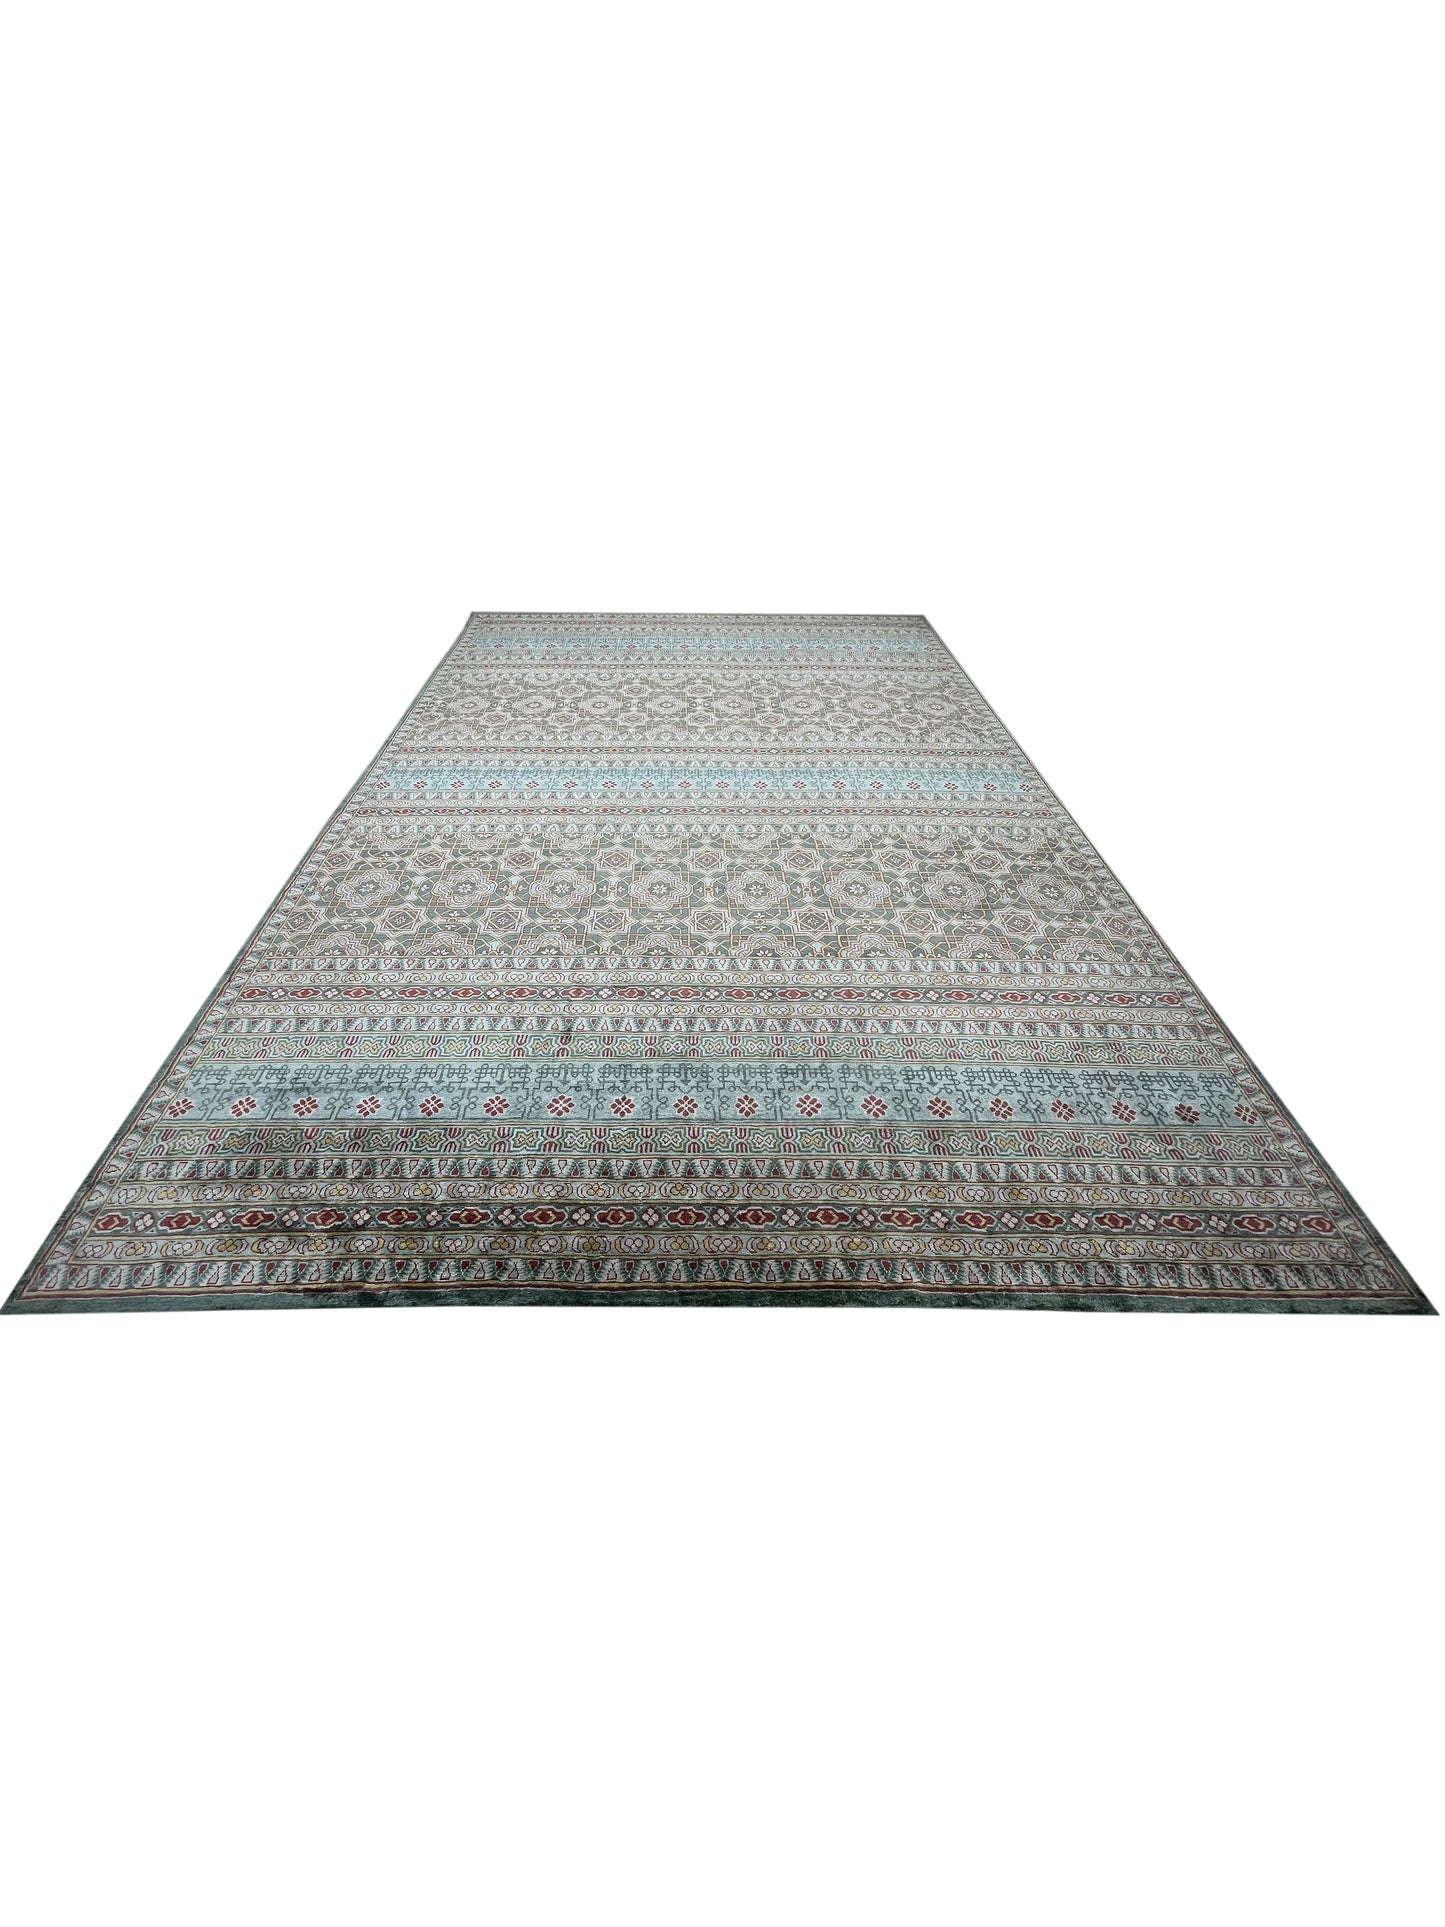 Get trendy with Blue, Grey Pure Silk Transitional Geometrical Area Rug 9.11x13.9ft 301x419Cms - Contemporary Rugs available at Jaipur Oriental Rugs. Grab yours for $9820.00 today!